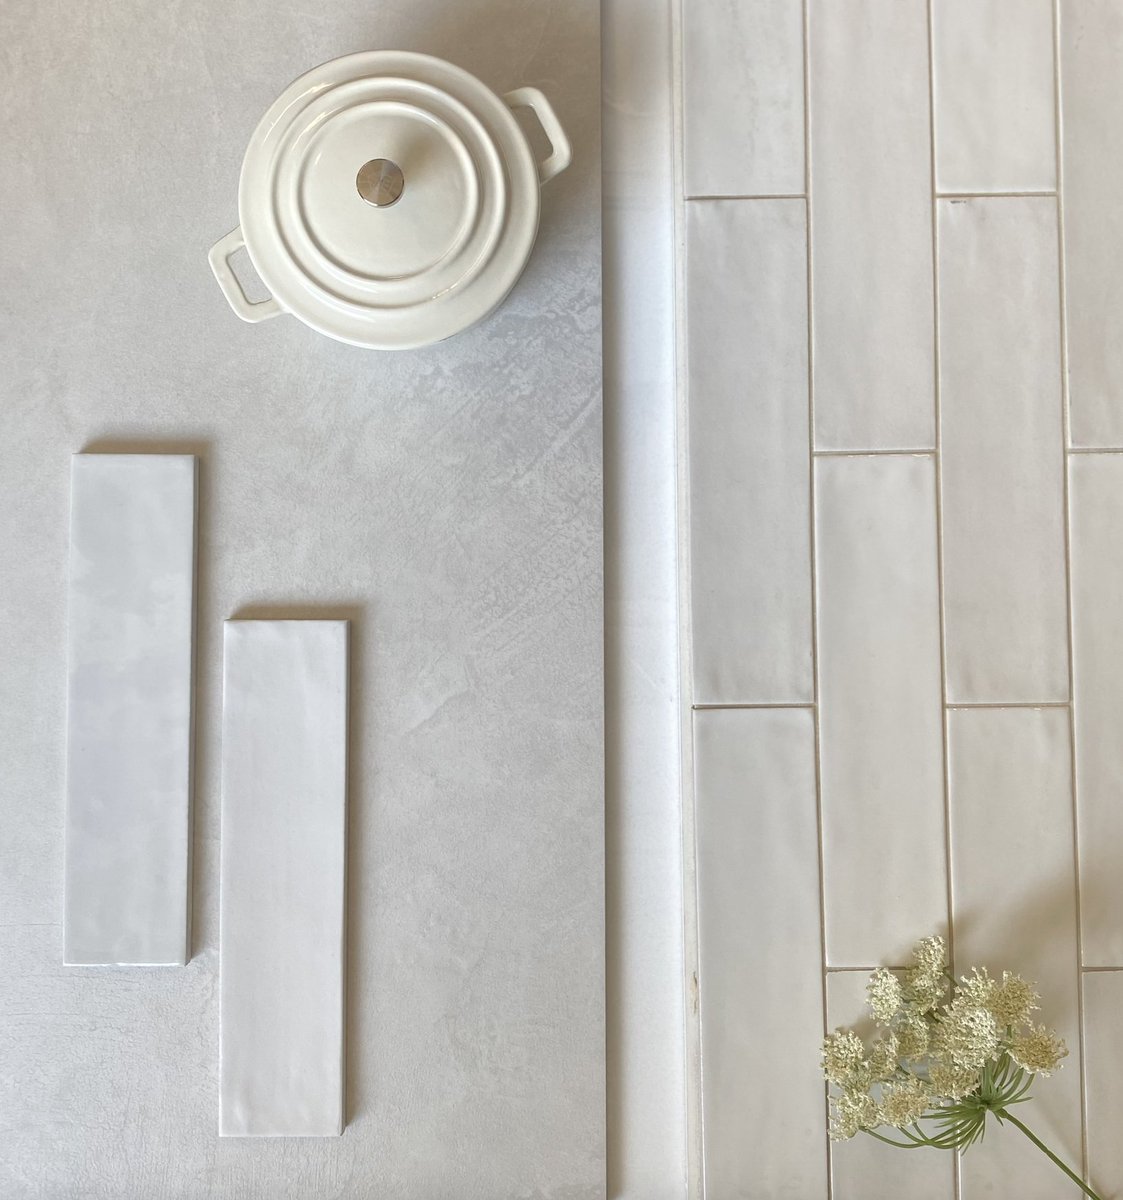 Serene creams. Take time to unwind today!

Featuring: OVERLOOK, perfect for floor and wall.
#minimalistaesthetic #cream #tilemoodboard #architessa #tilelove